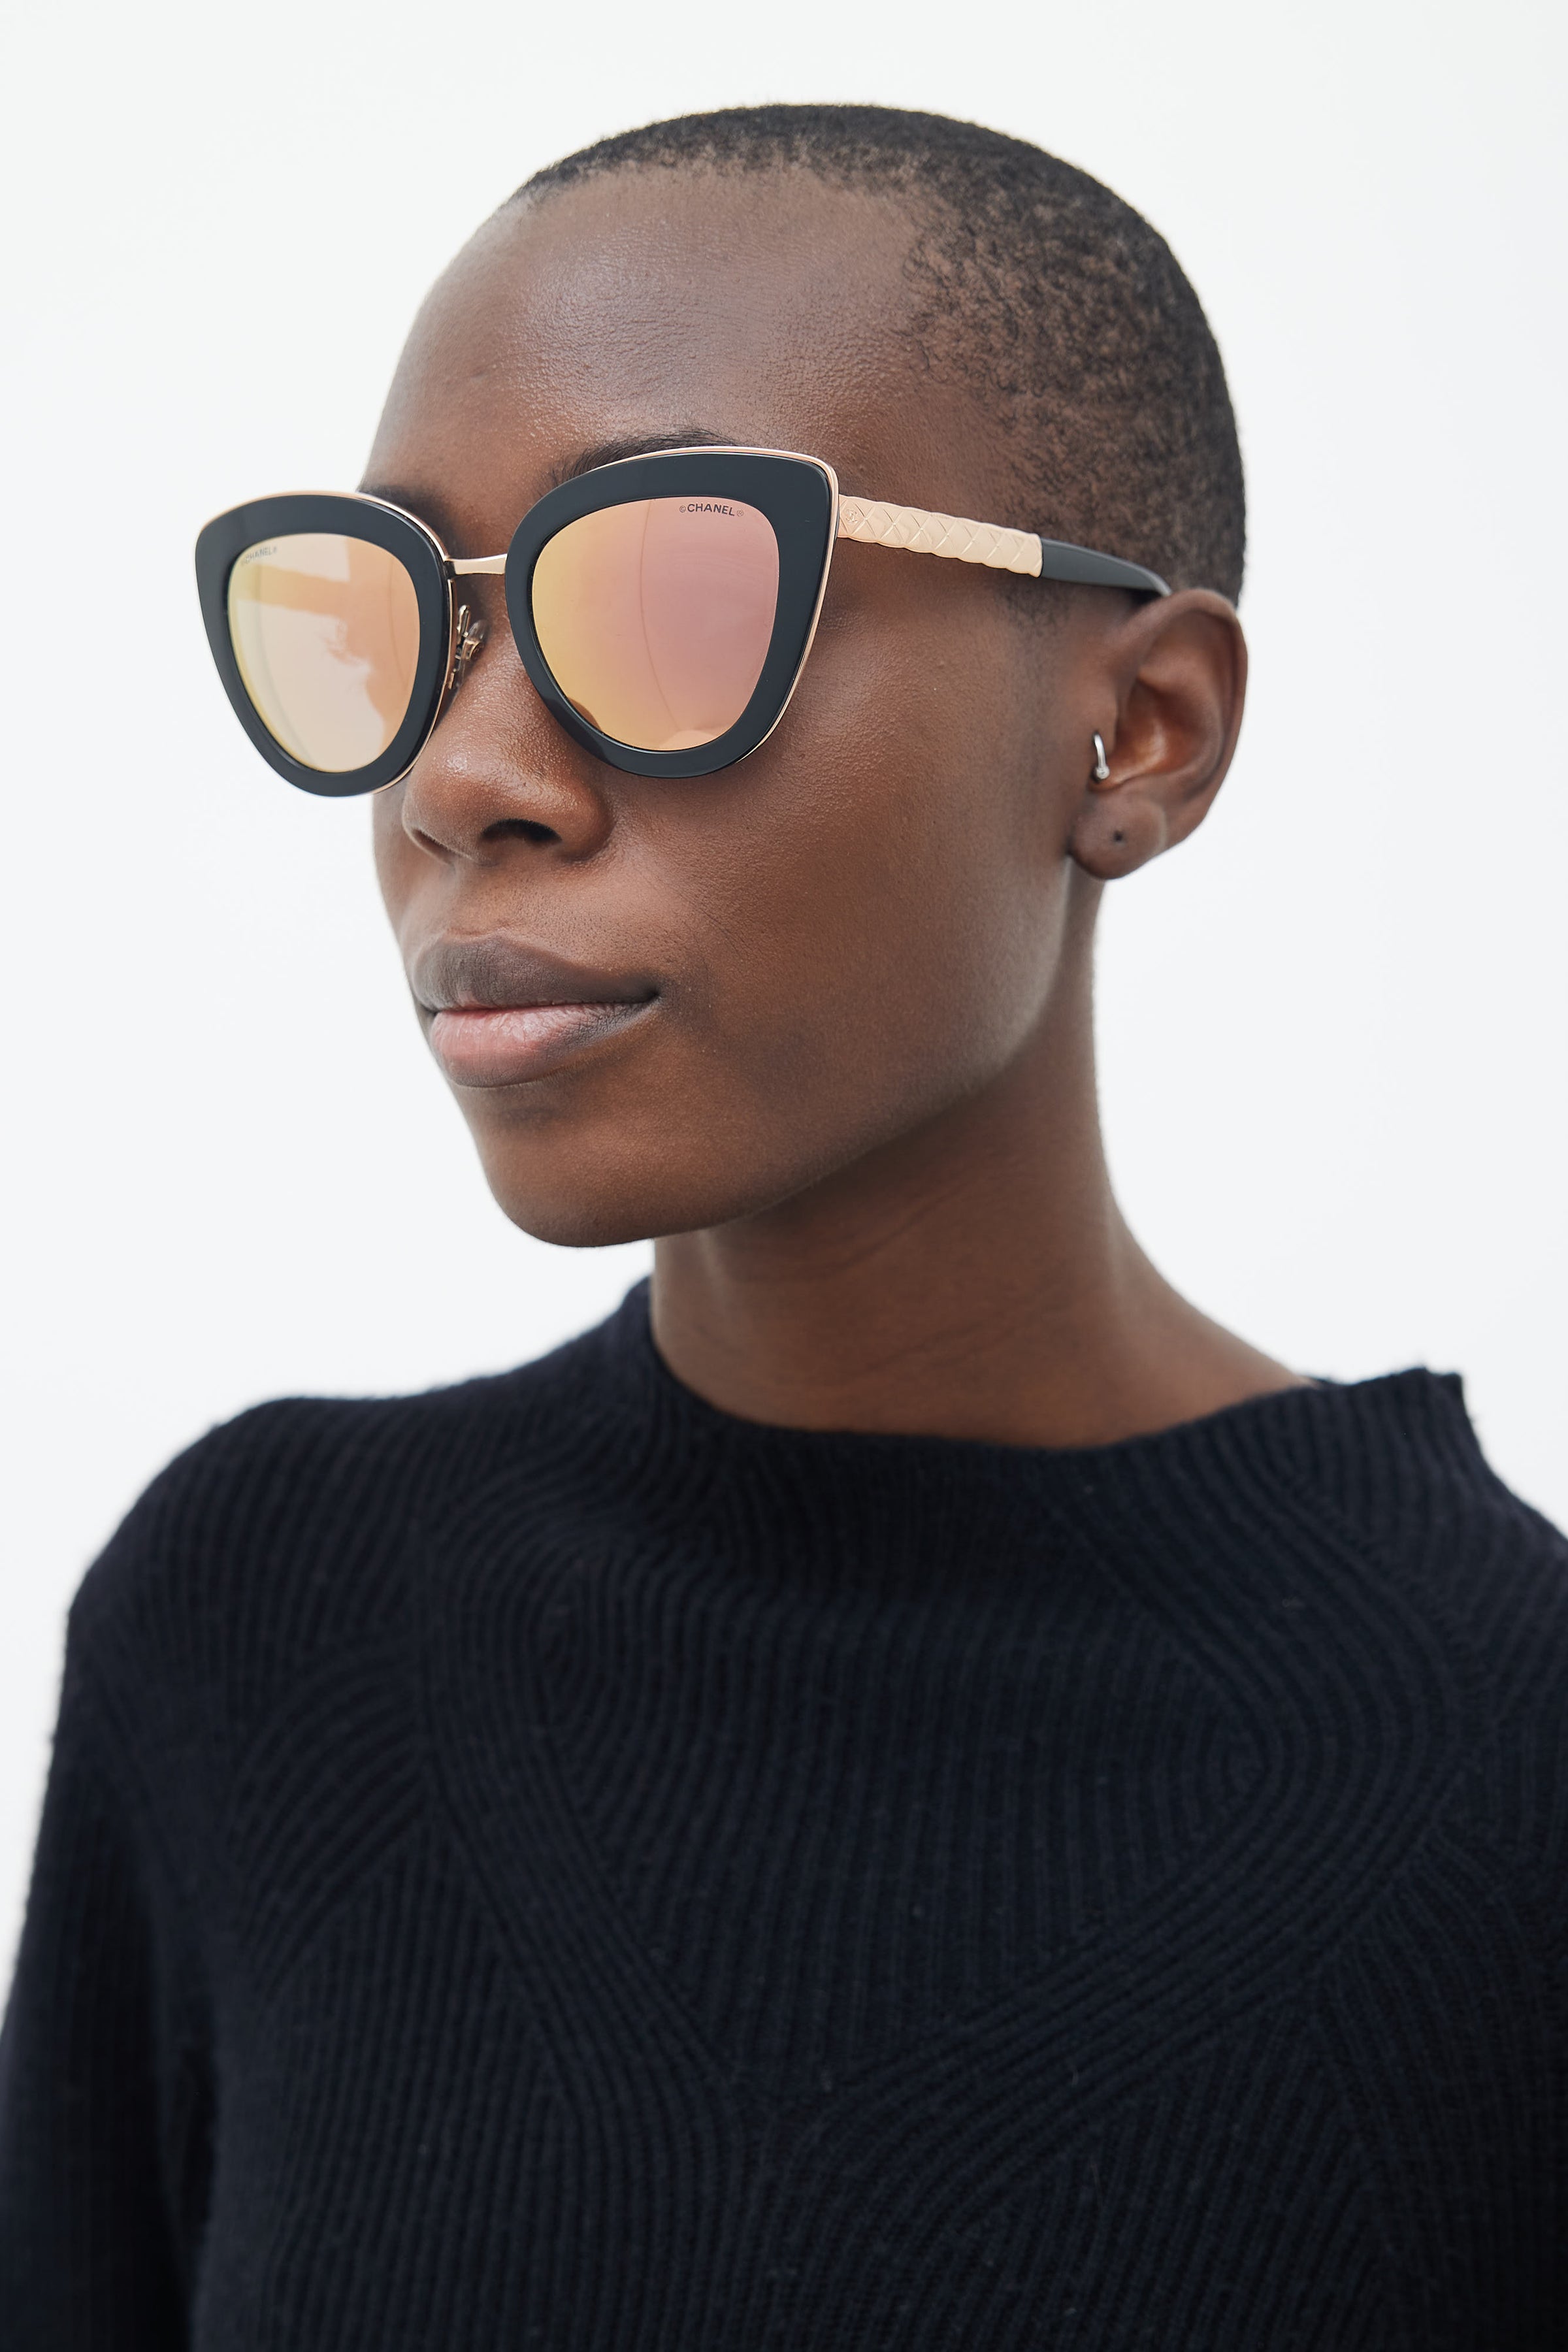 Chanel // Black Cat Eye Quilted 5368 Sunglasses – VSP Consignment